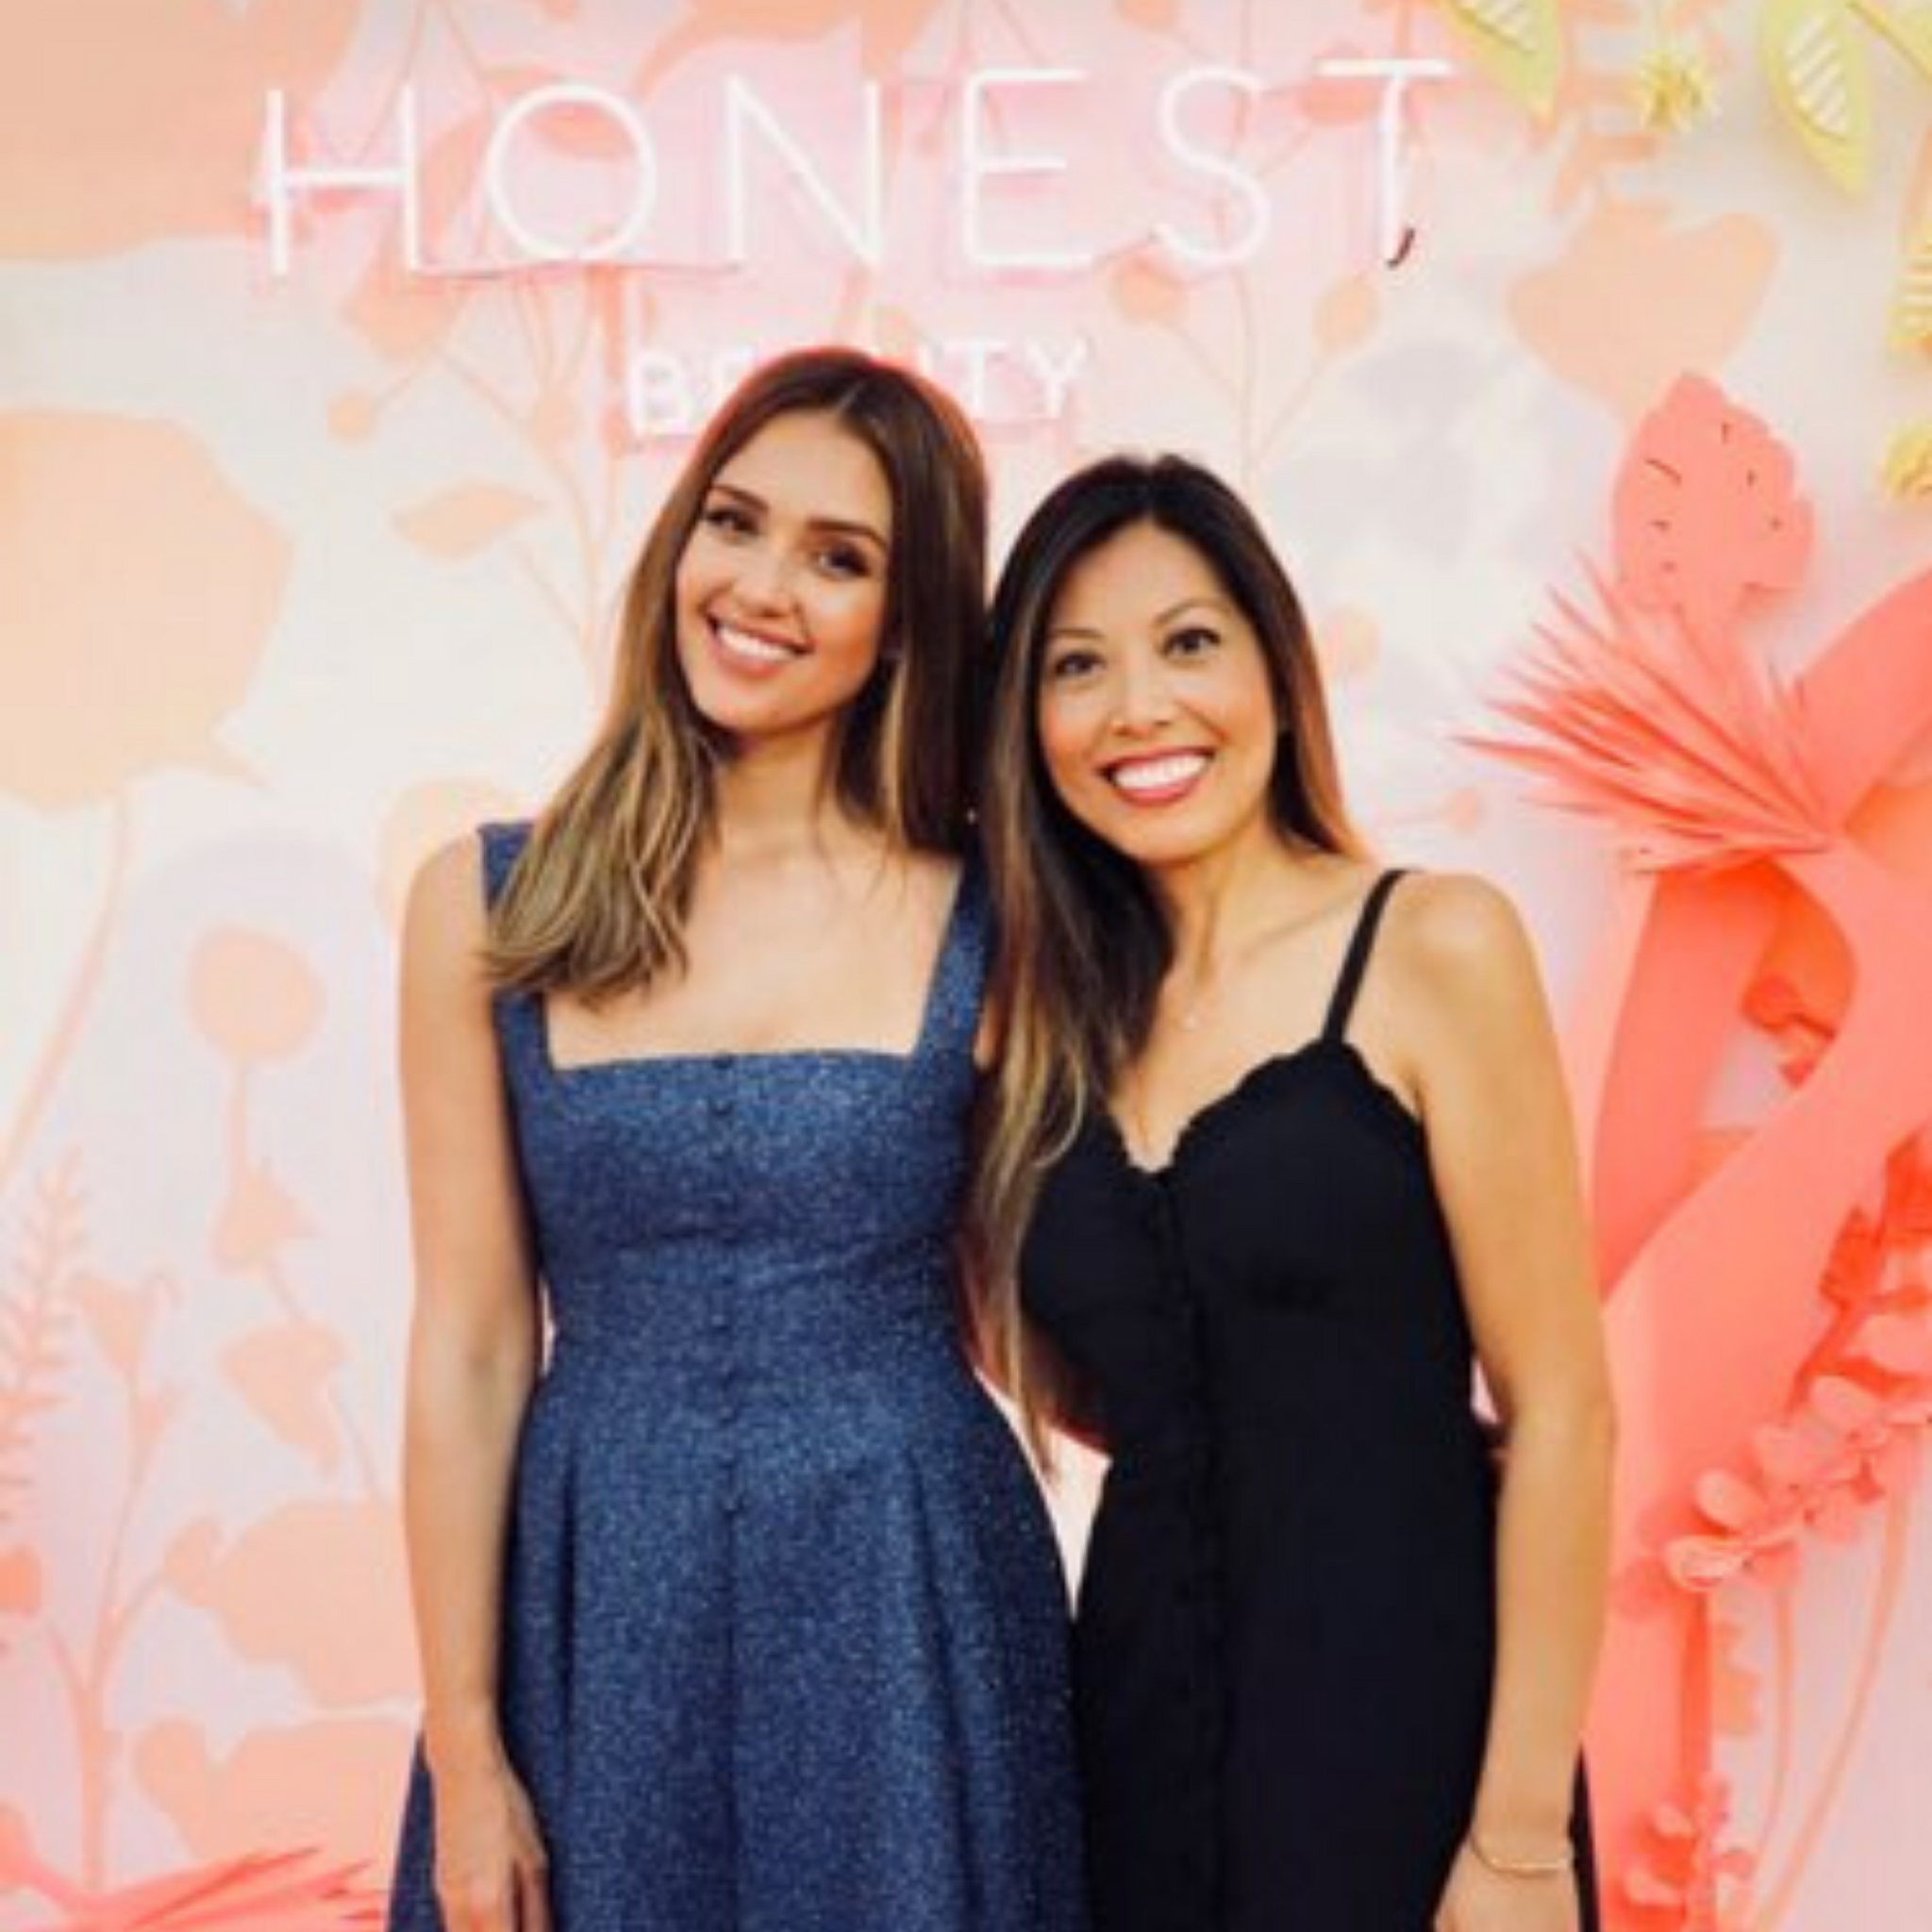 Yvonne’s Vegan Kitchen at The Honest Beauty Launch Party